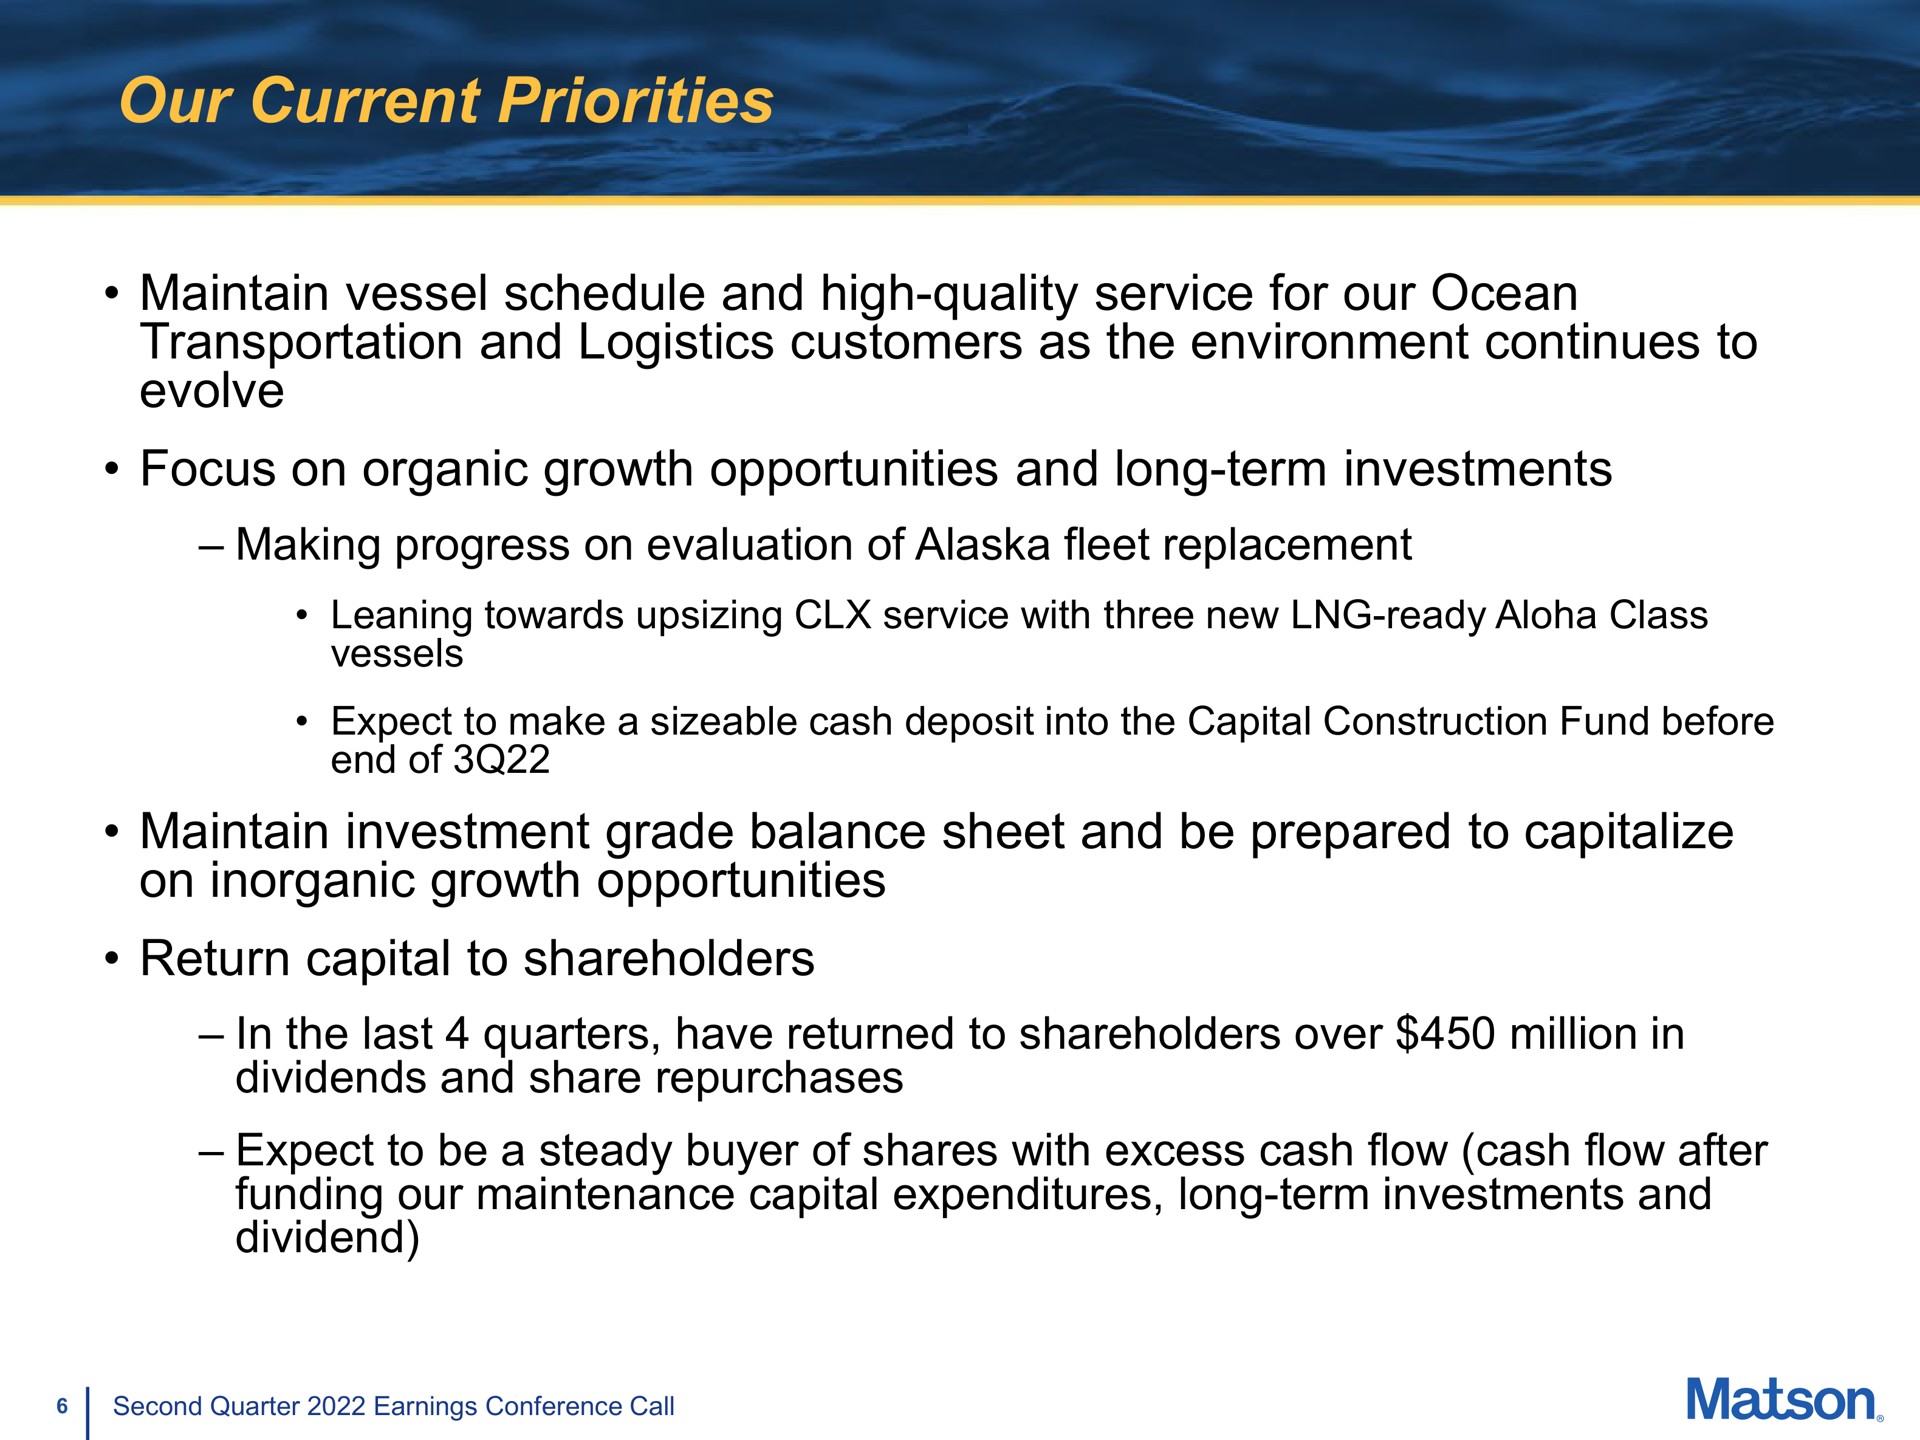 our current priorities maintain vessel schedule and high quality service for our ocean transportation and logistics customers as the environment continues to evolve focus on organic growth opportunities and long term investments making progress on evaluation of fleet replacement maintain investment grade balance sheet and be prepared to capitalize on inorganic growth opportunities return capital to shareholders in the last quarters have returned to shareholders over million in dividends and share repurchases expect to be a steady buyer of shares with excess cash flow cash flow after funding our maintenance capital expenditures long term investments and dividend | Matson